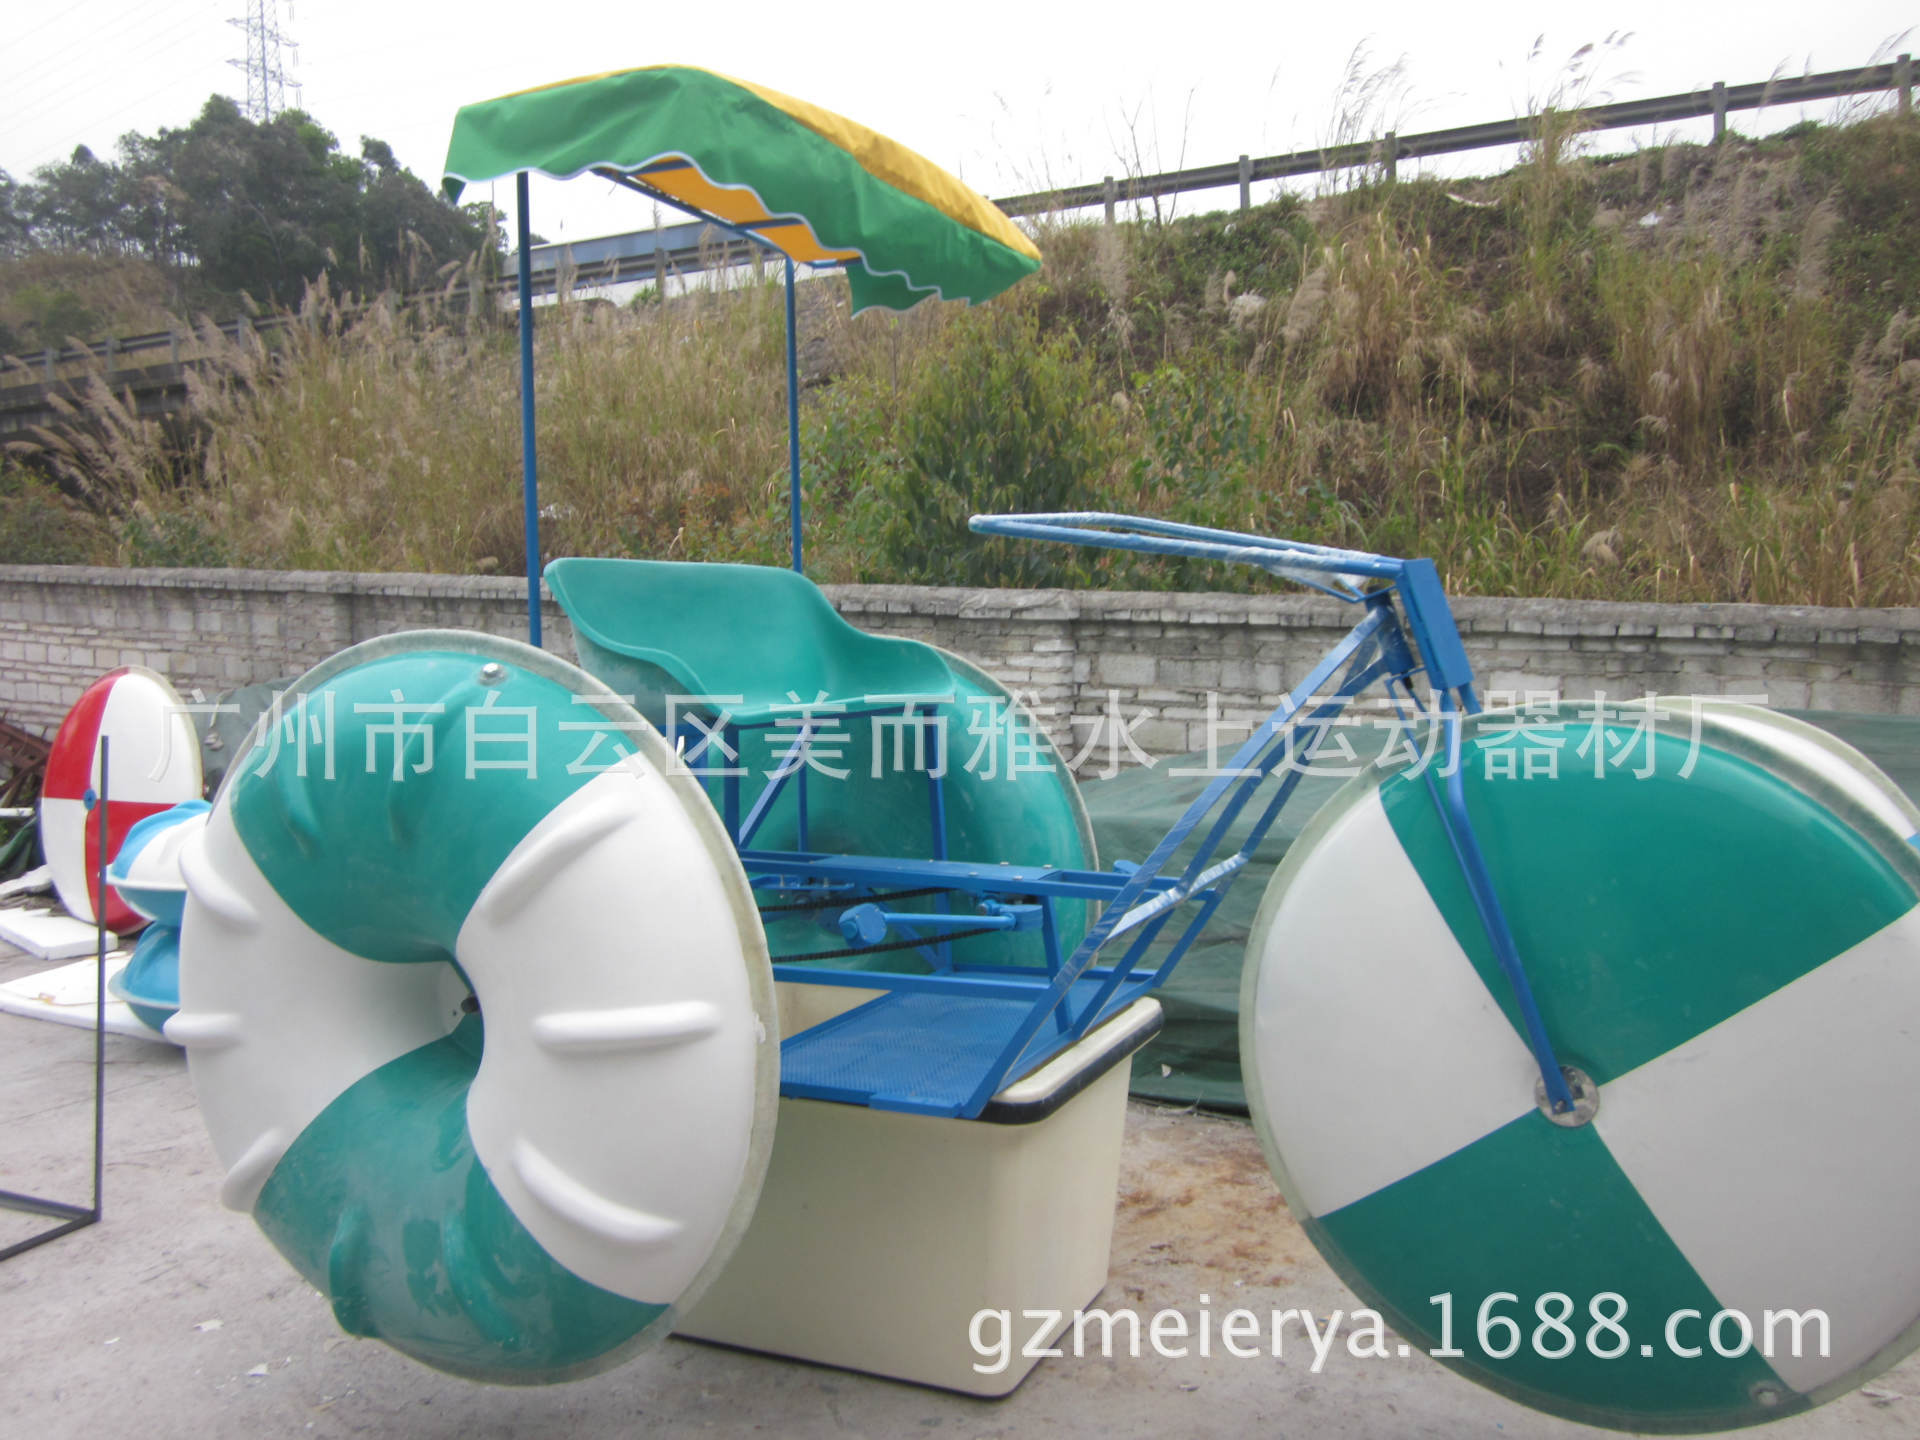 factory Long-term supply FRP Aquatic Tricycle goods in stock M-033 whole country Picking Quality Assurance